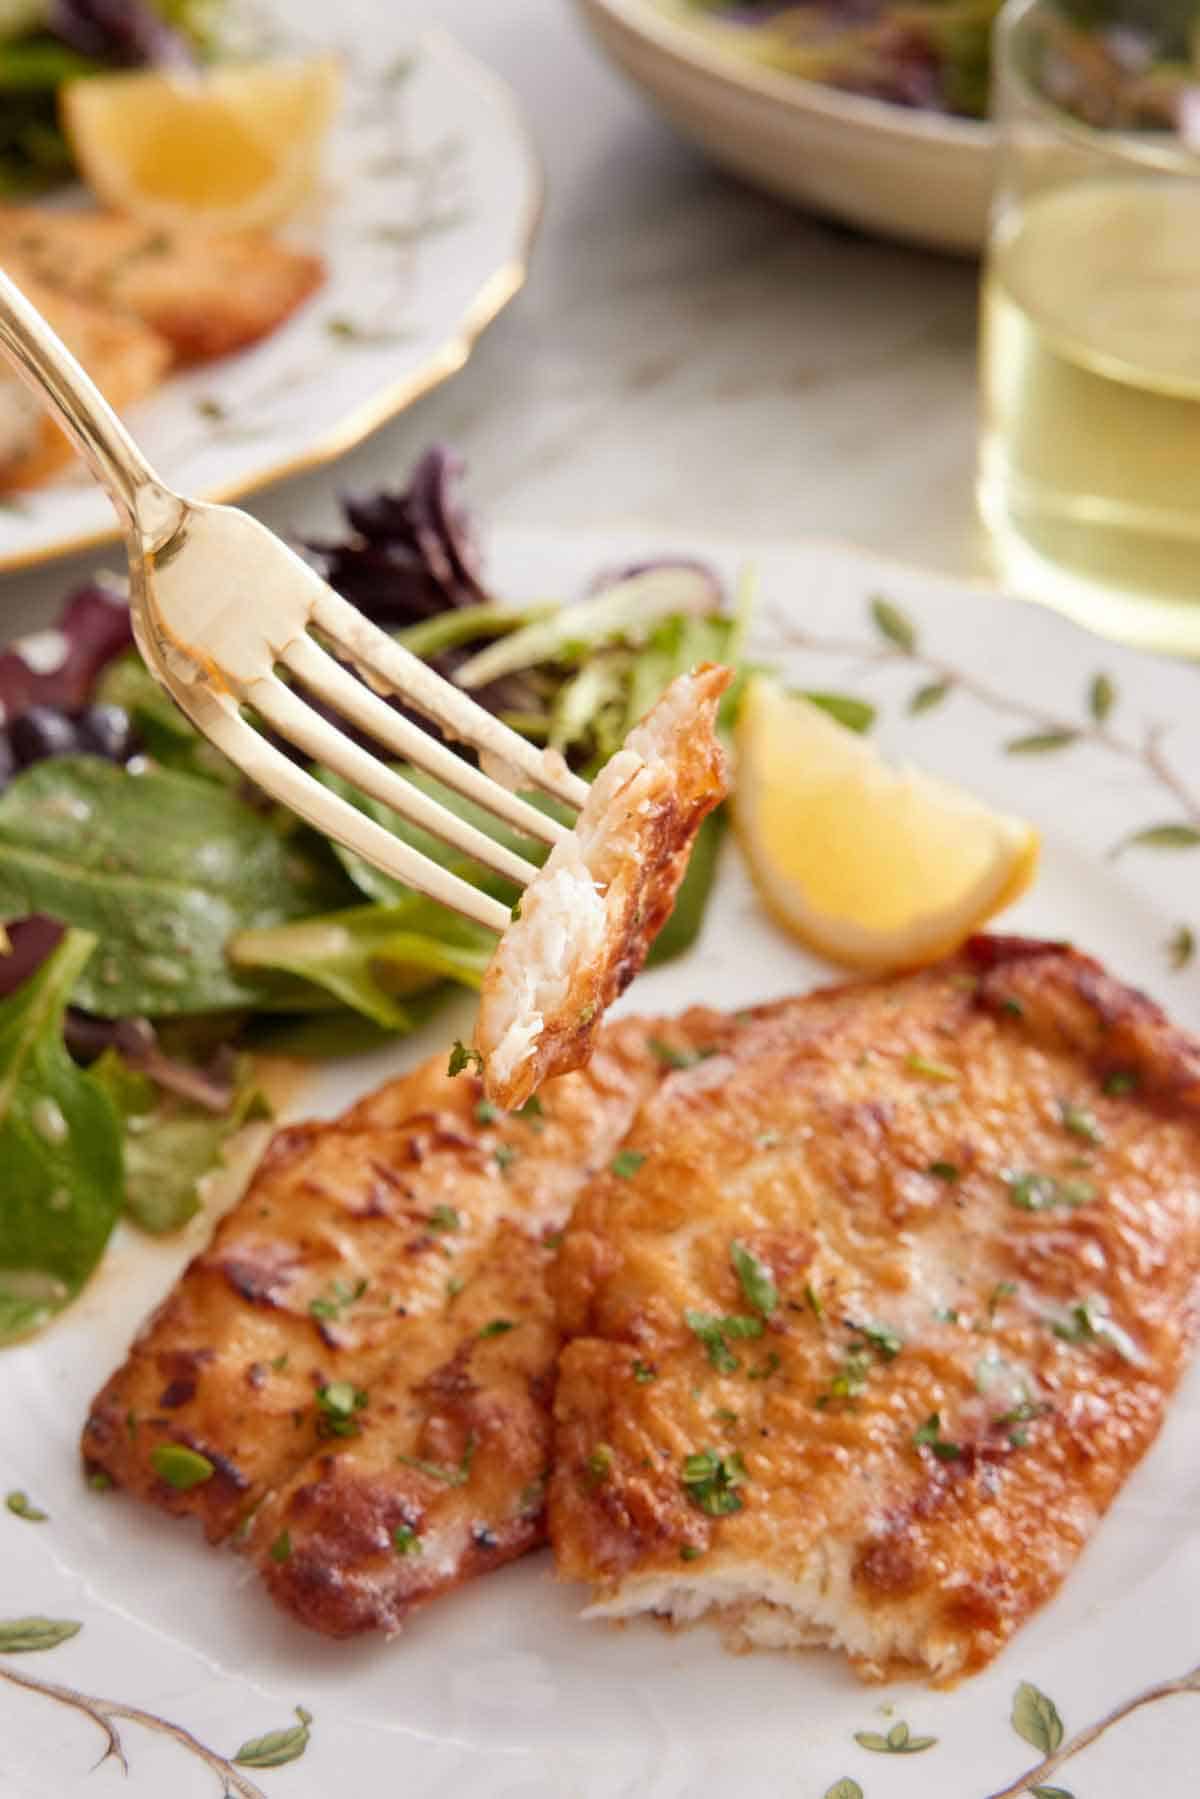 A fork lifting up a bite of sole meunière from a plate.